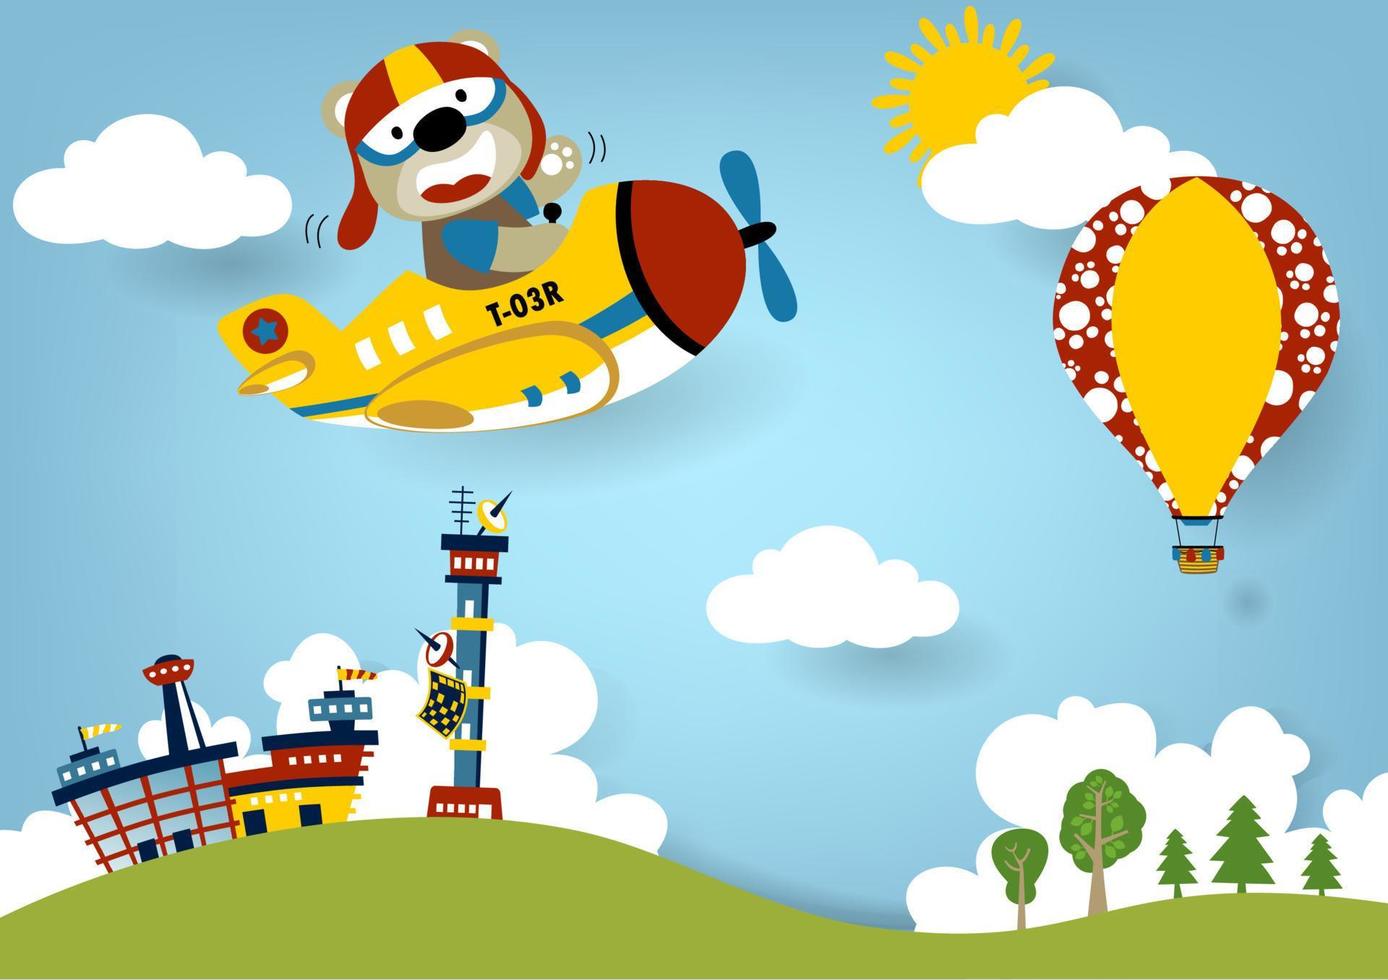 Funny bear on airplane with hot air balloon on airport scenery background, vector cartoon illustration